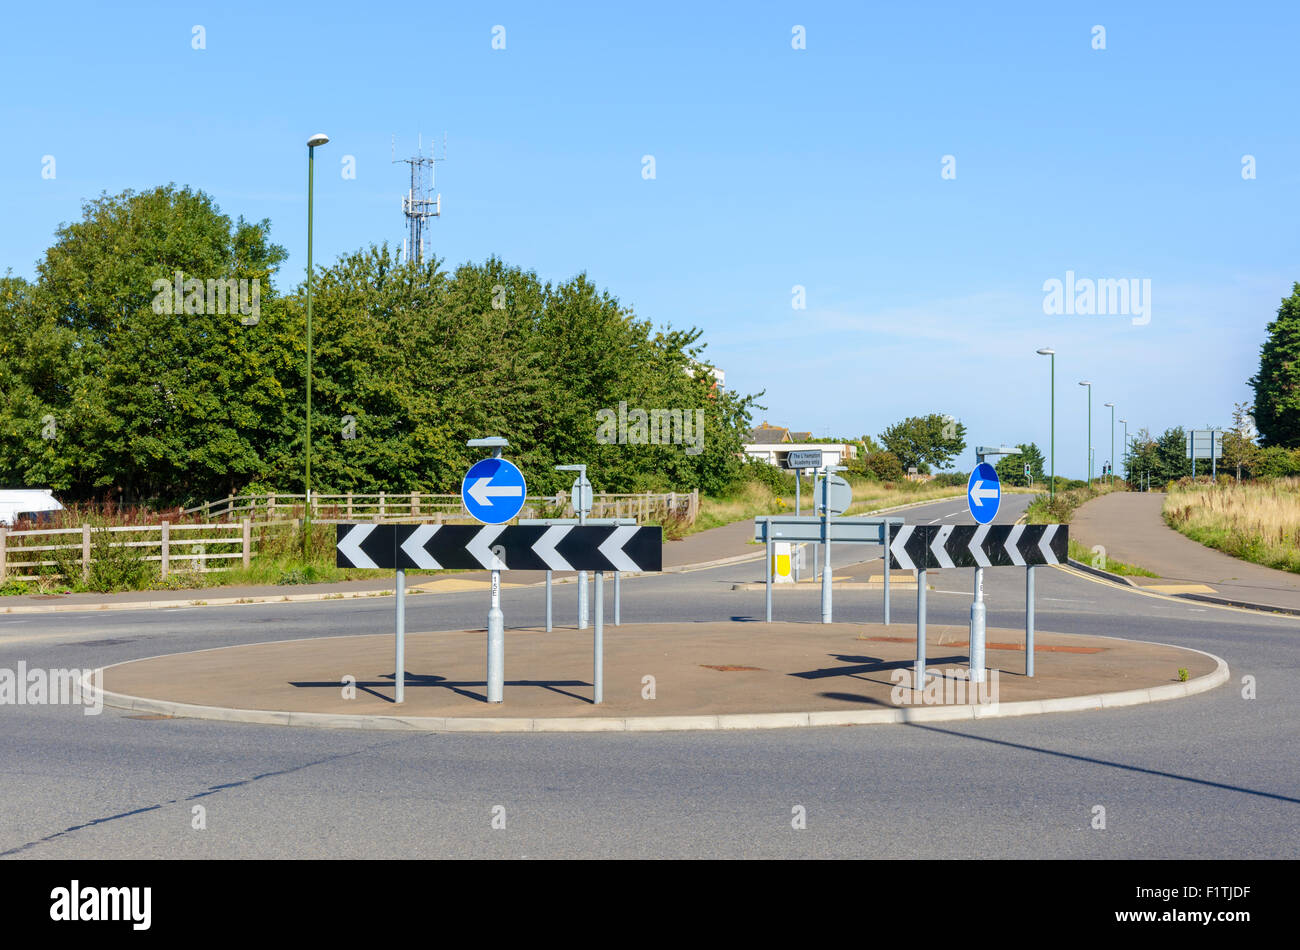 Roundabout junction with no cars on a road in England, UK. Stock Photo